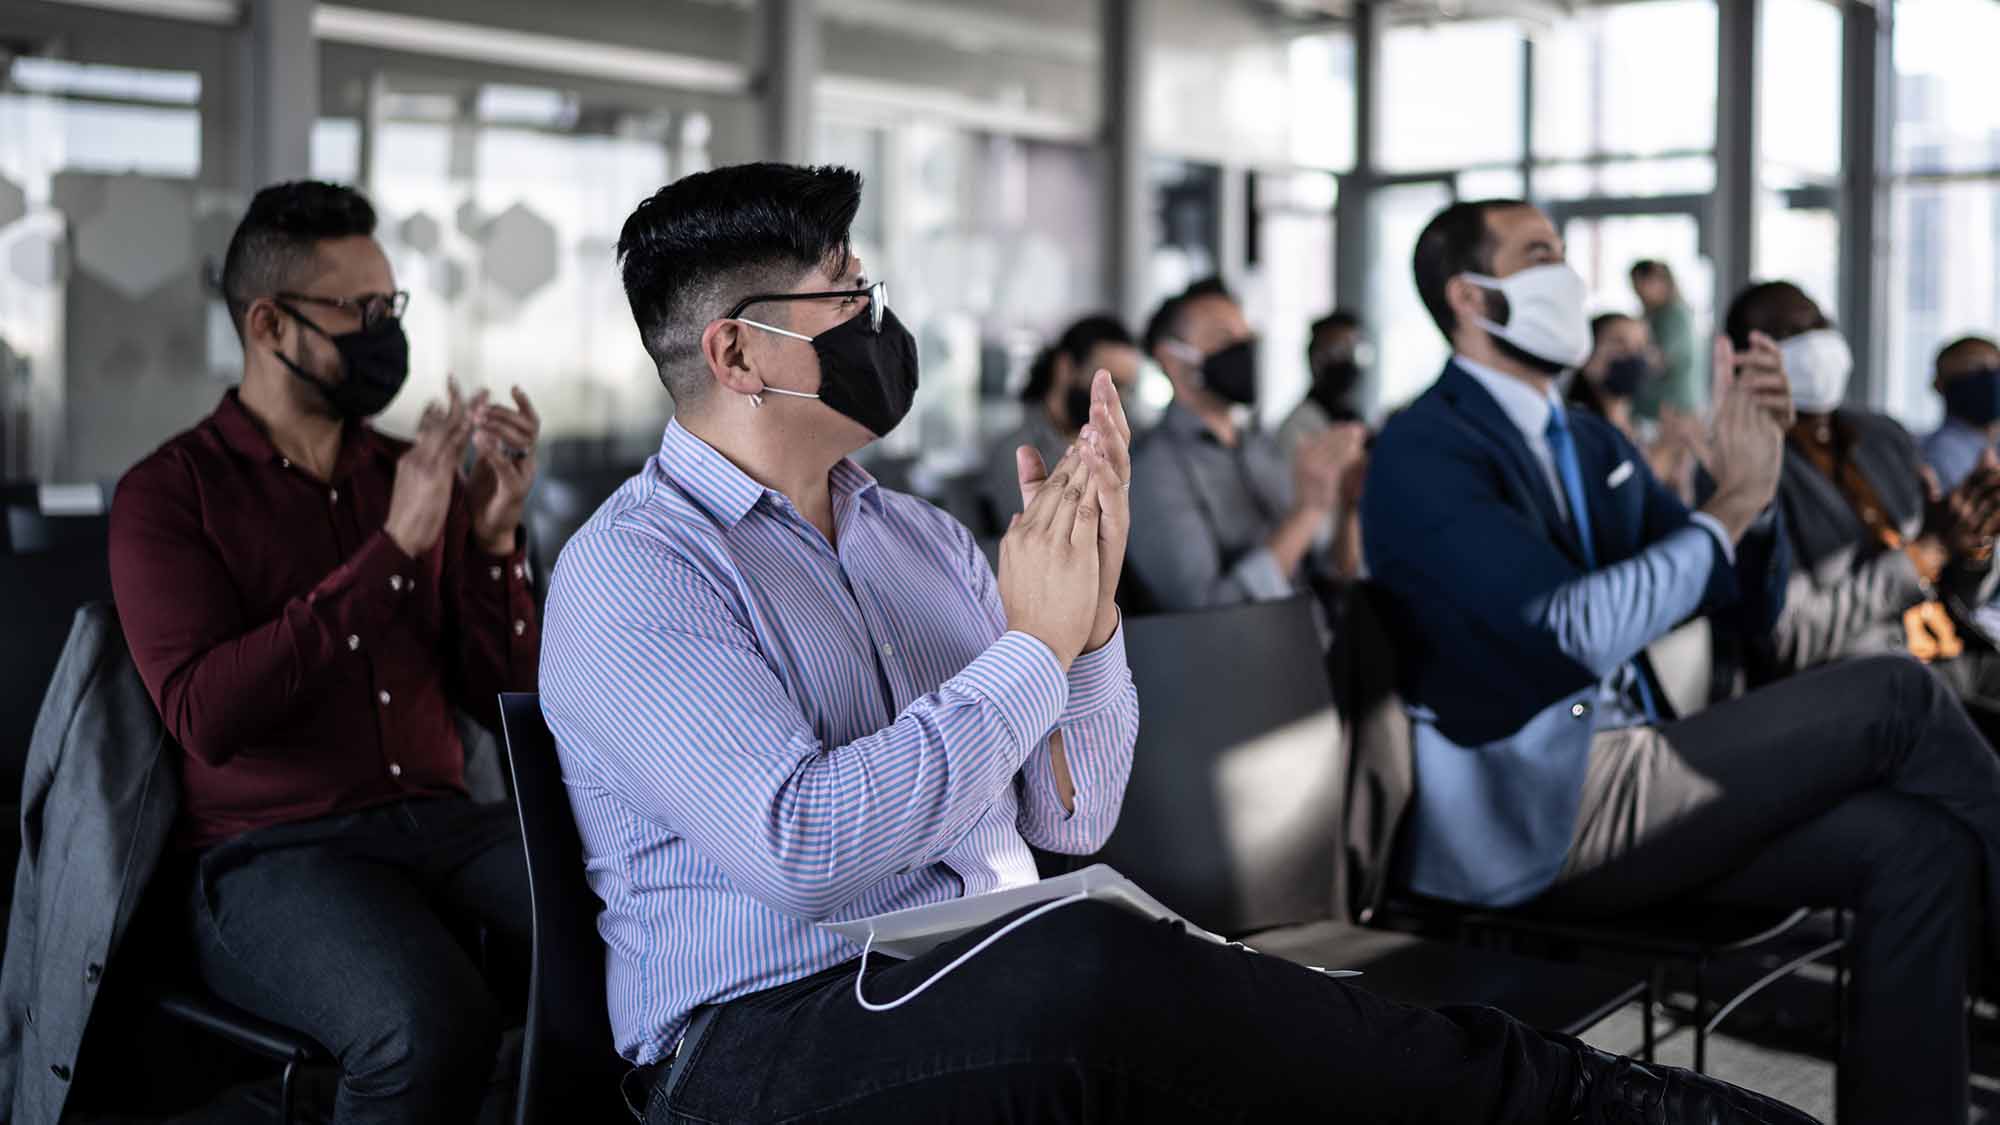 A group of people, wearing face masks, sitting and listening to a presentation in a conference room.